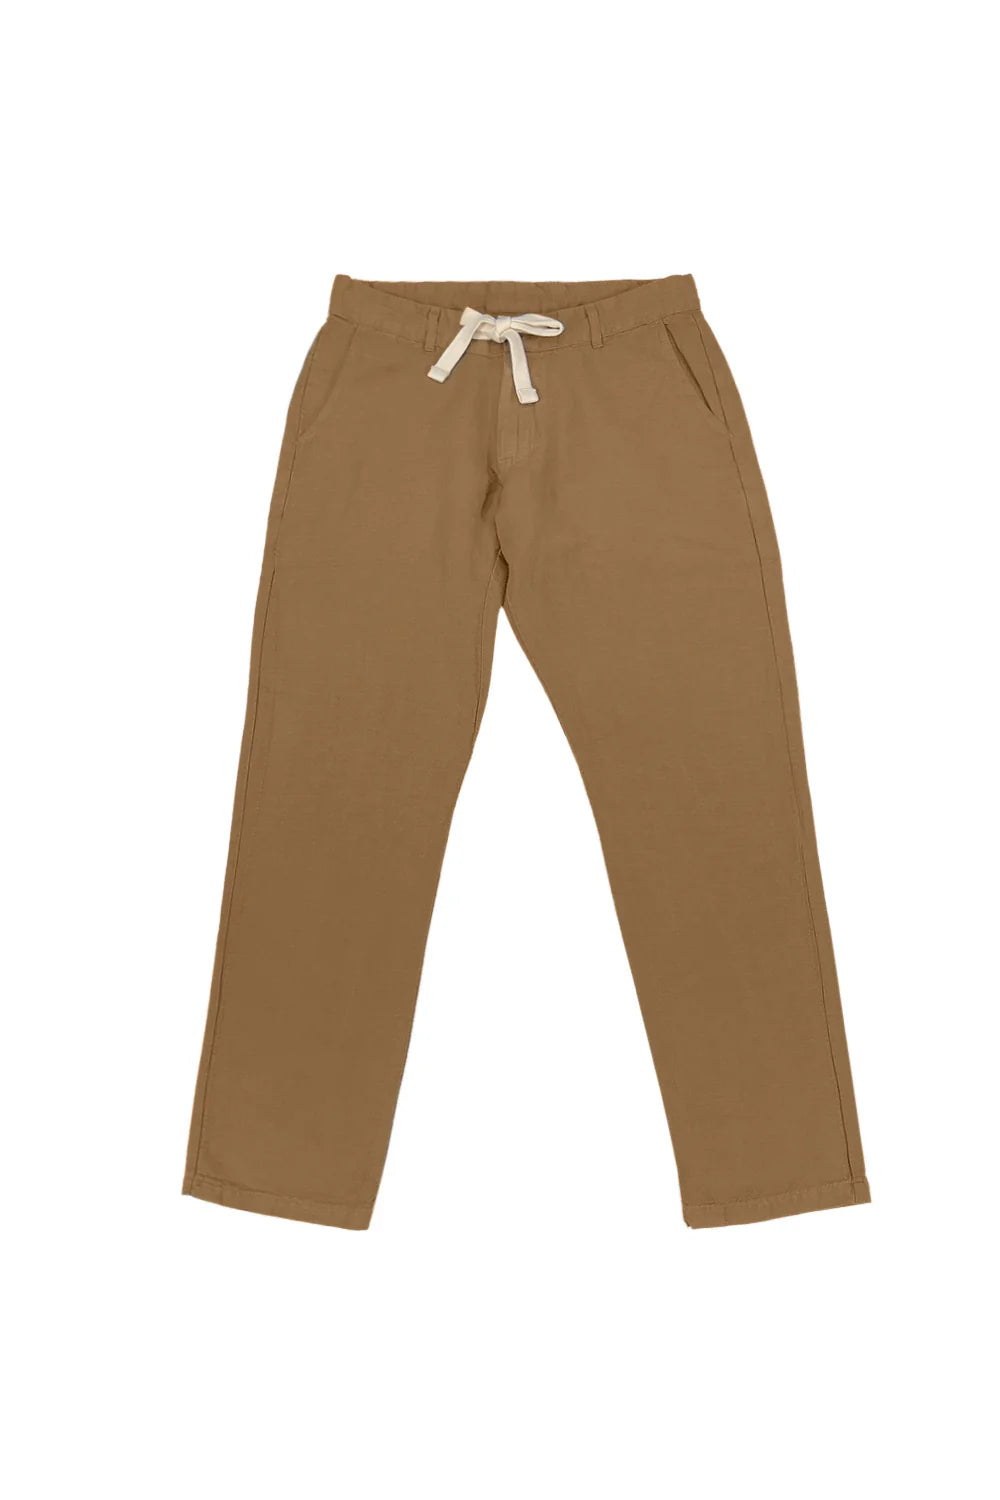 TRAVERSE PANT - COYOTE